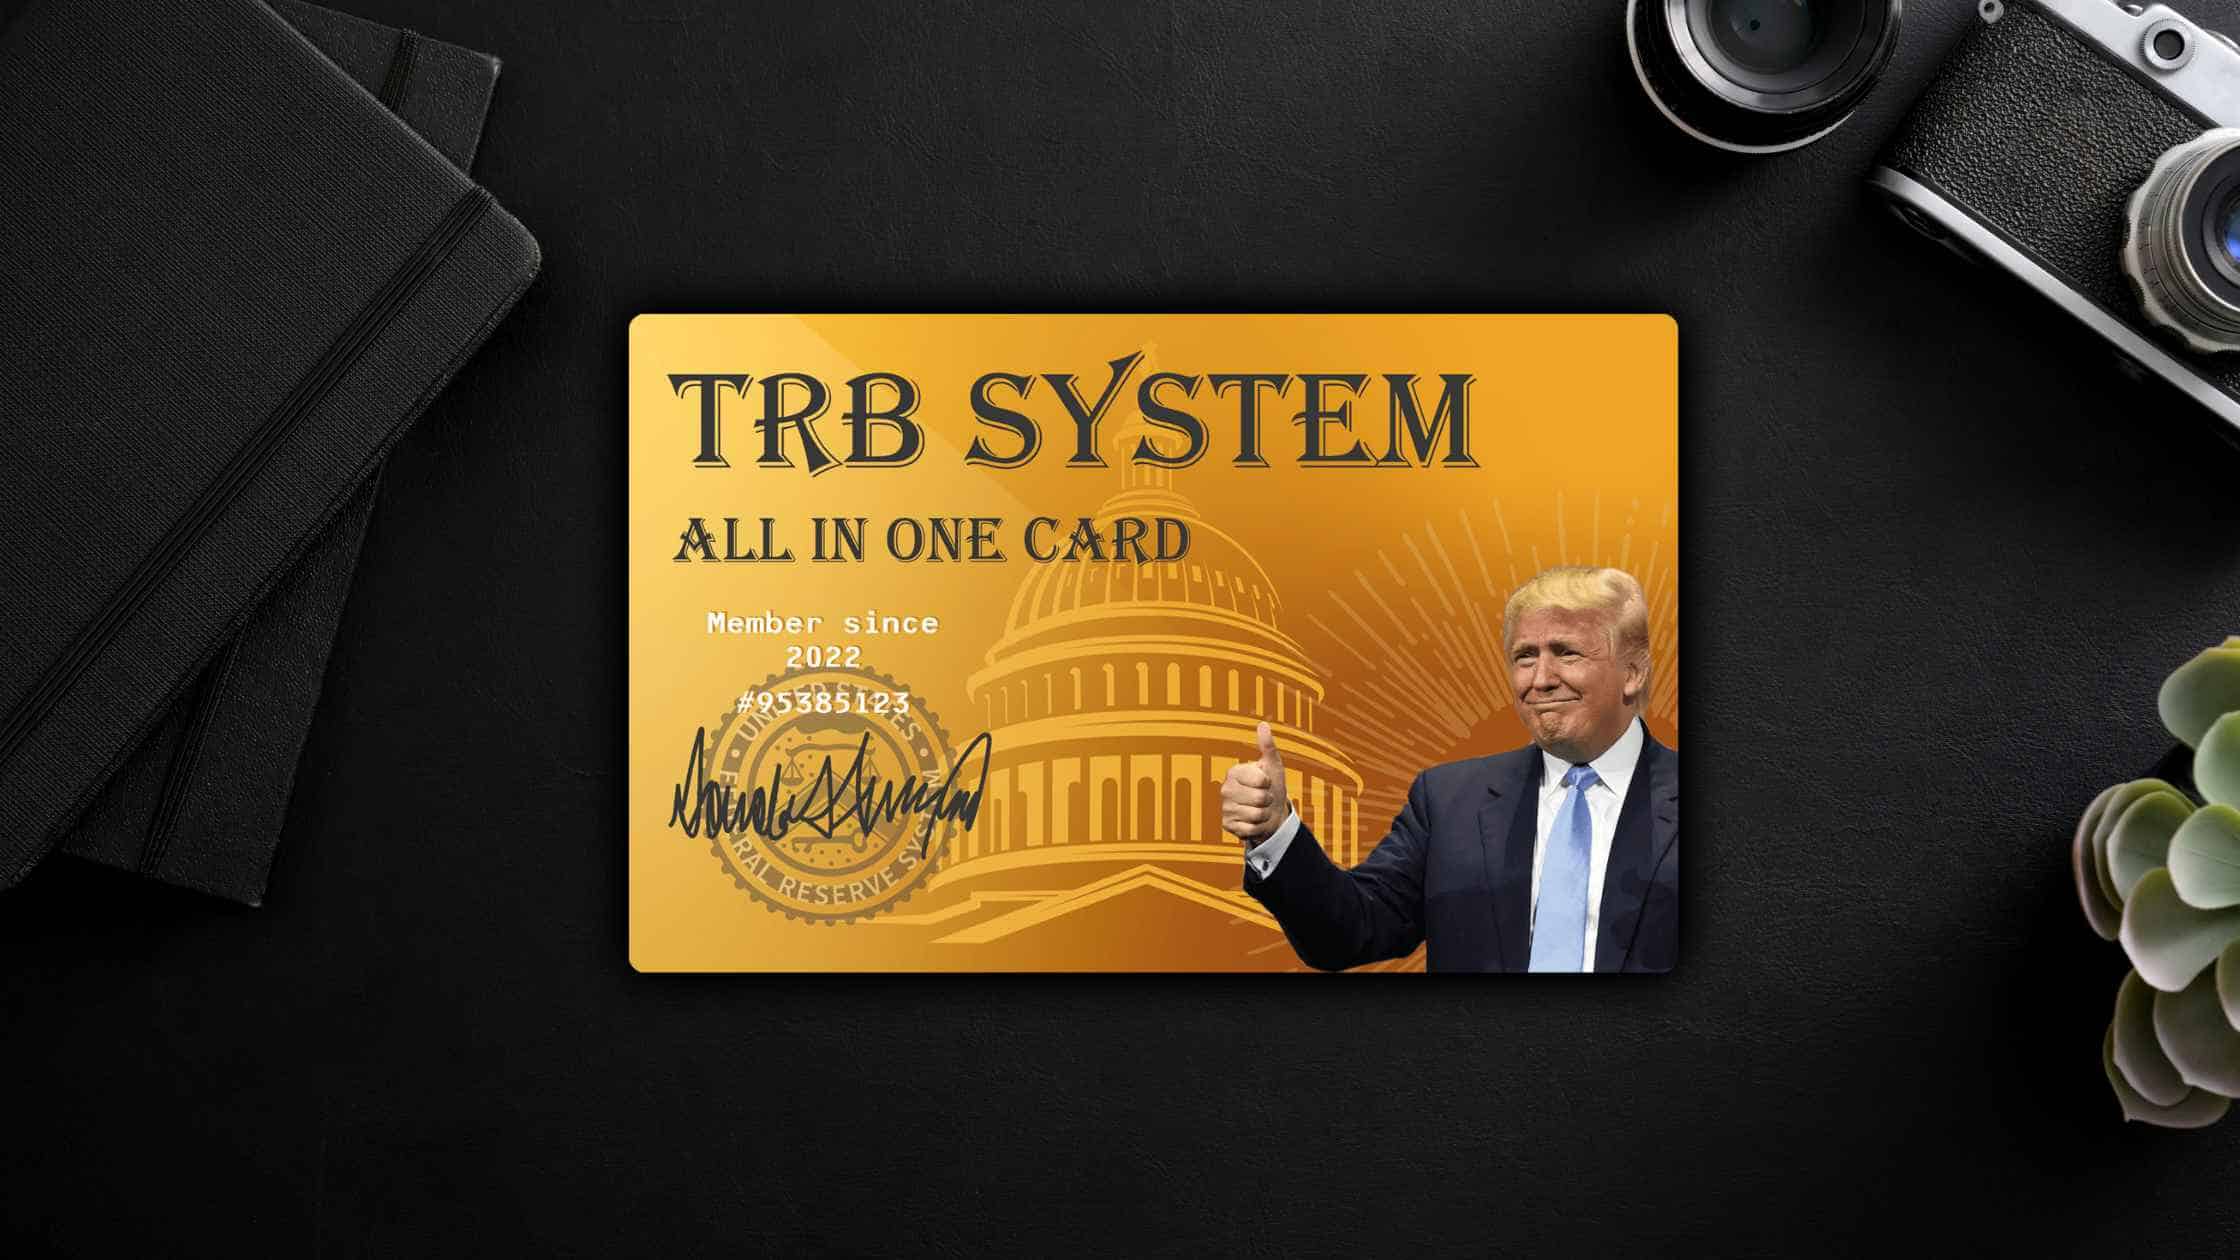 TRB System Card Reviews Check The Reviews By The Used Customers!